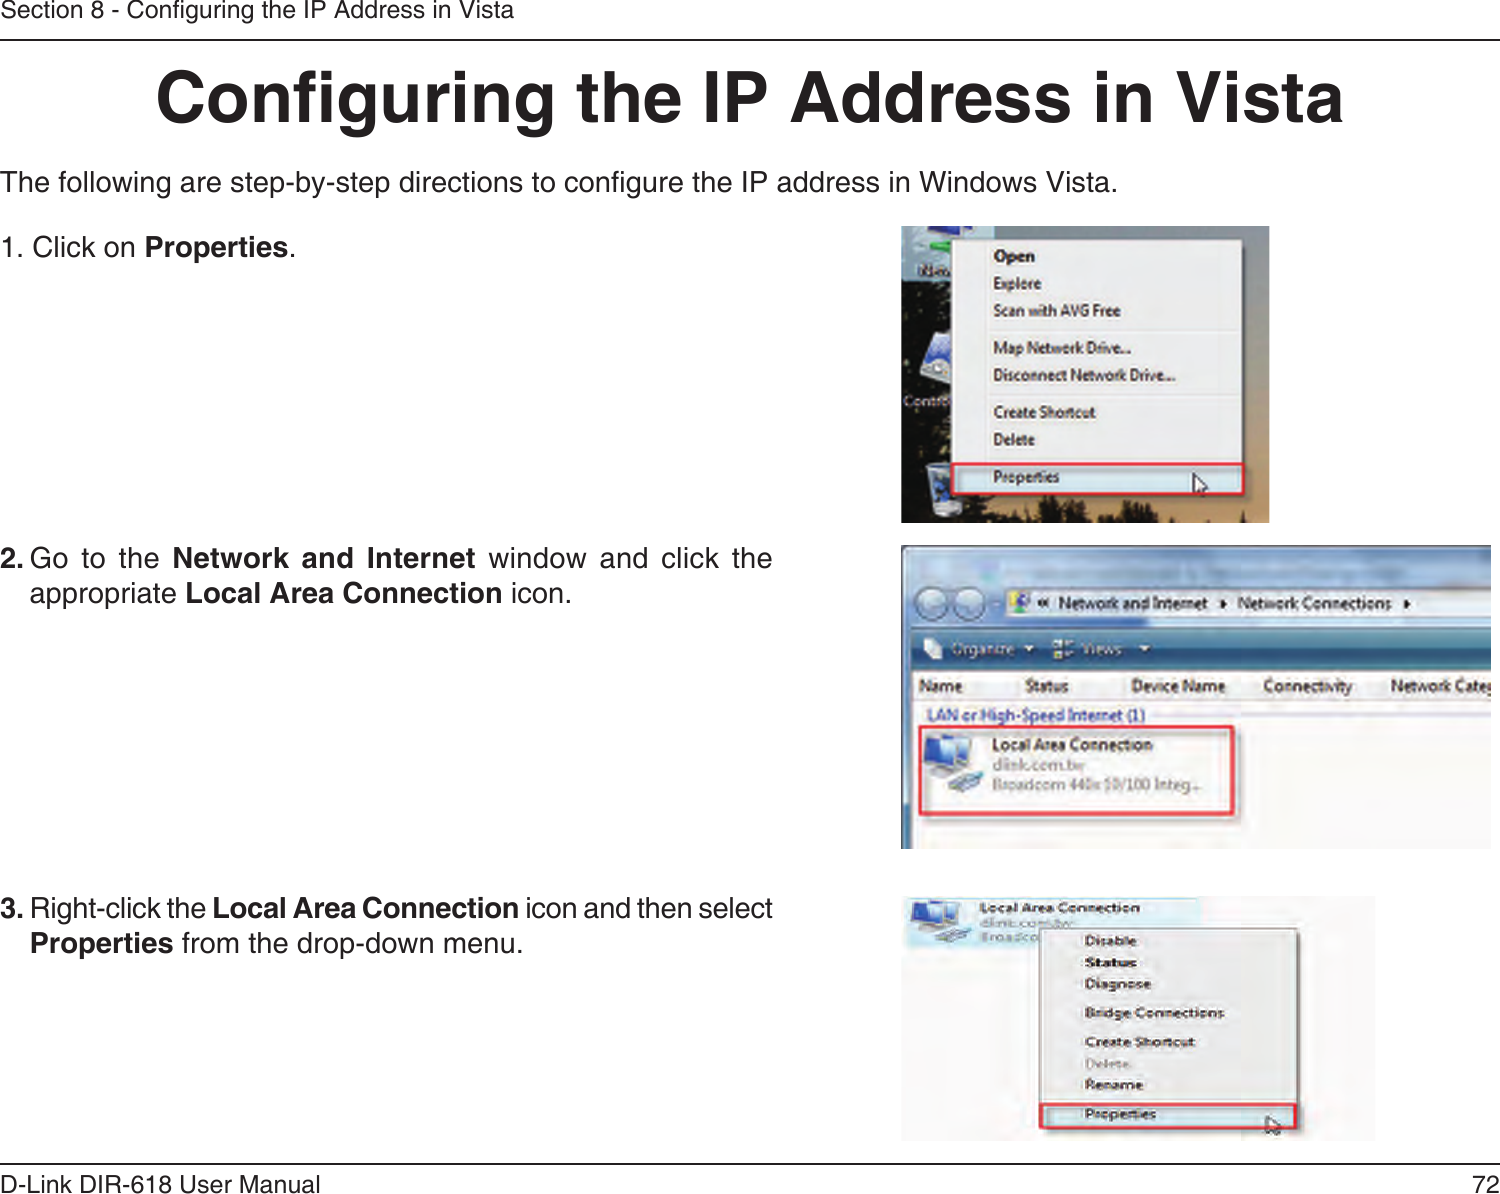 72D-Link DIR-618 User ManualSection 8 - Conguring the IP Address in VistaConguring the IP Address in VistaThe following are step-by-step directions to congure the IP address in Windows Vista.      2. Go  to  the  Network and Internet  window  and  click  the appropriate Local Area Connection icon. 1. Click on Properties.3. Right-click the Local Area Connection icon and then select Properties from the drop-down menu. 